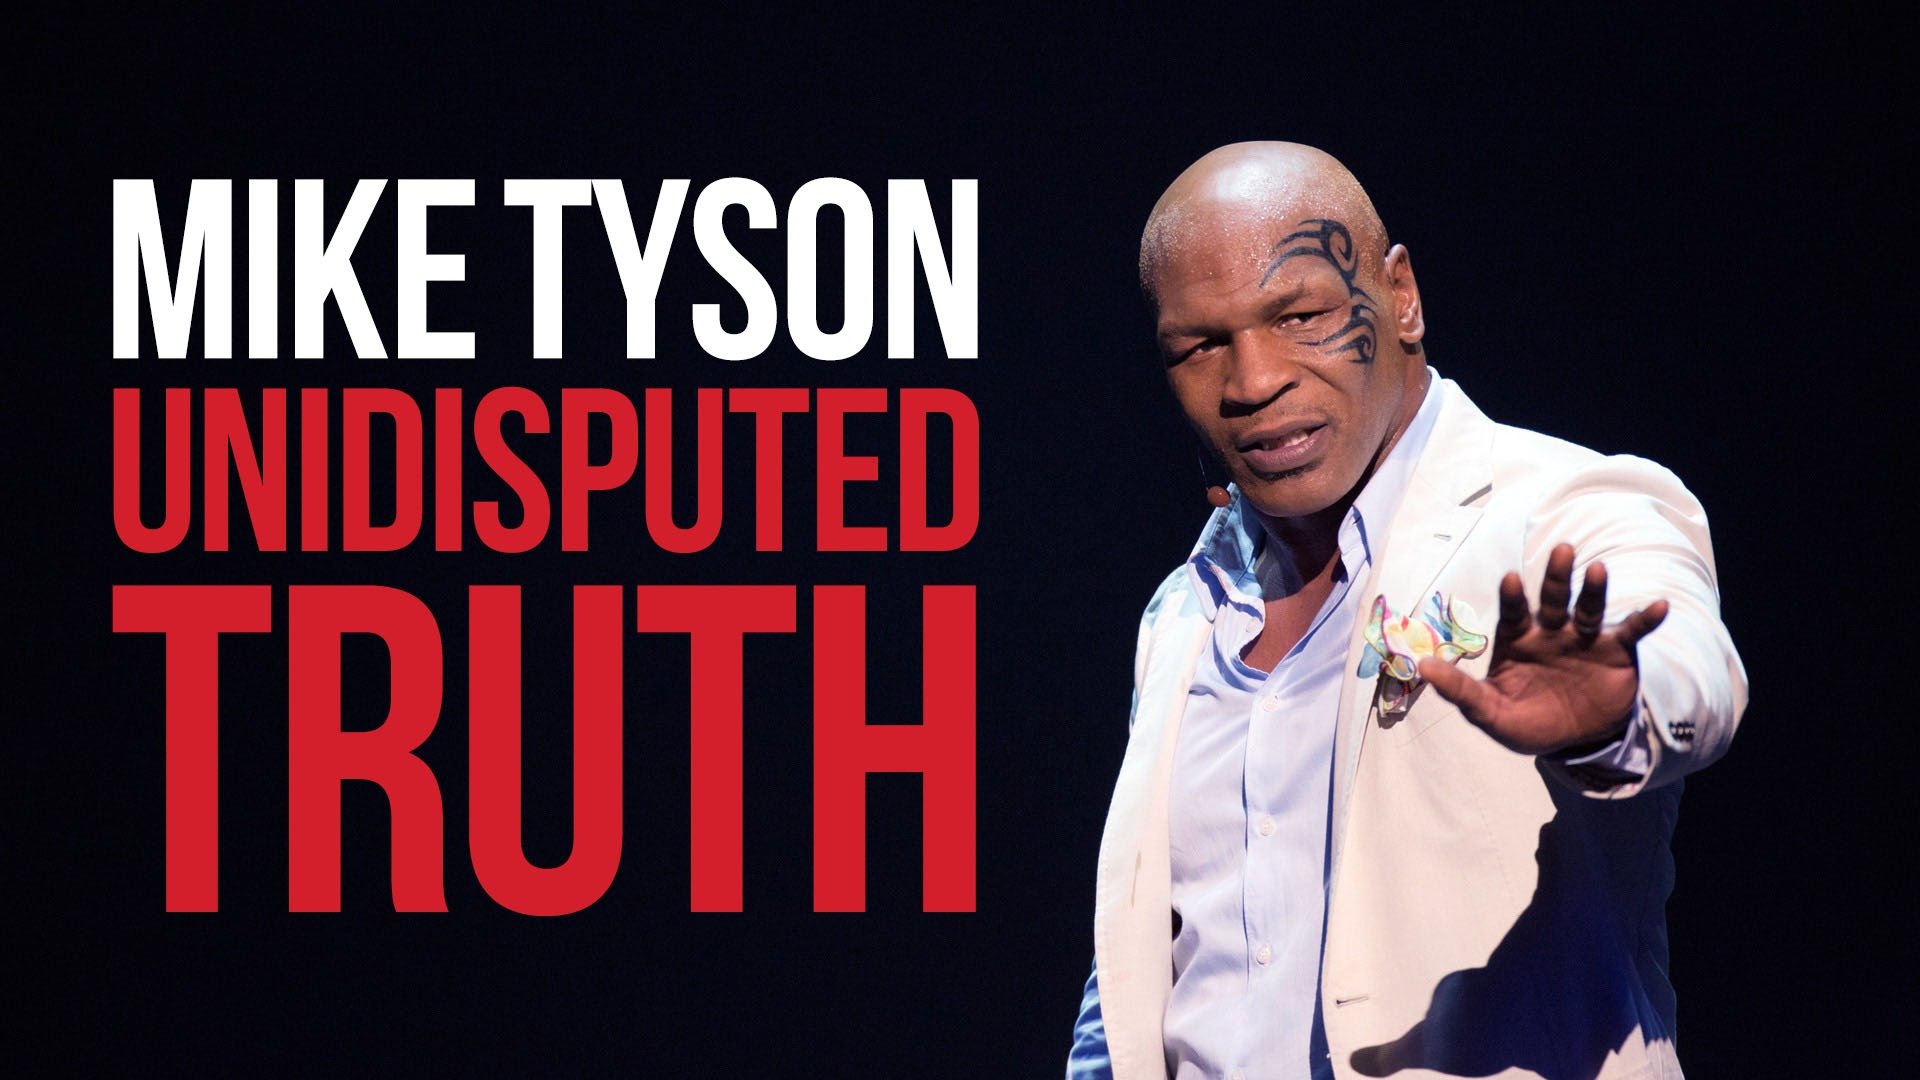 Mike Tyson Undisputed Truth - HBO Documentary